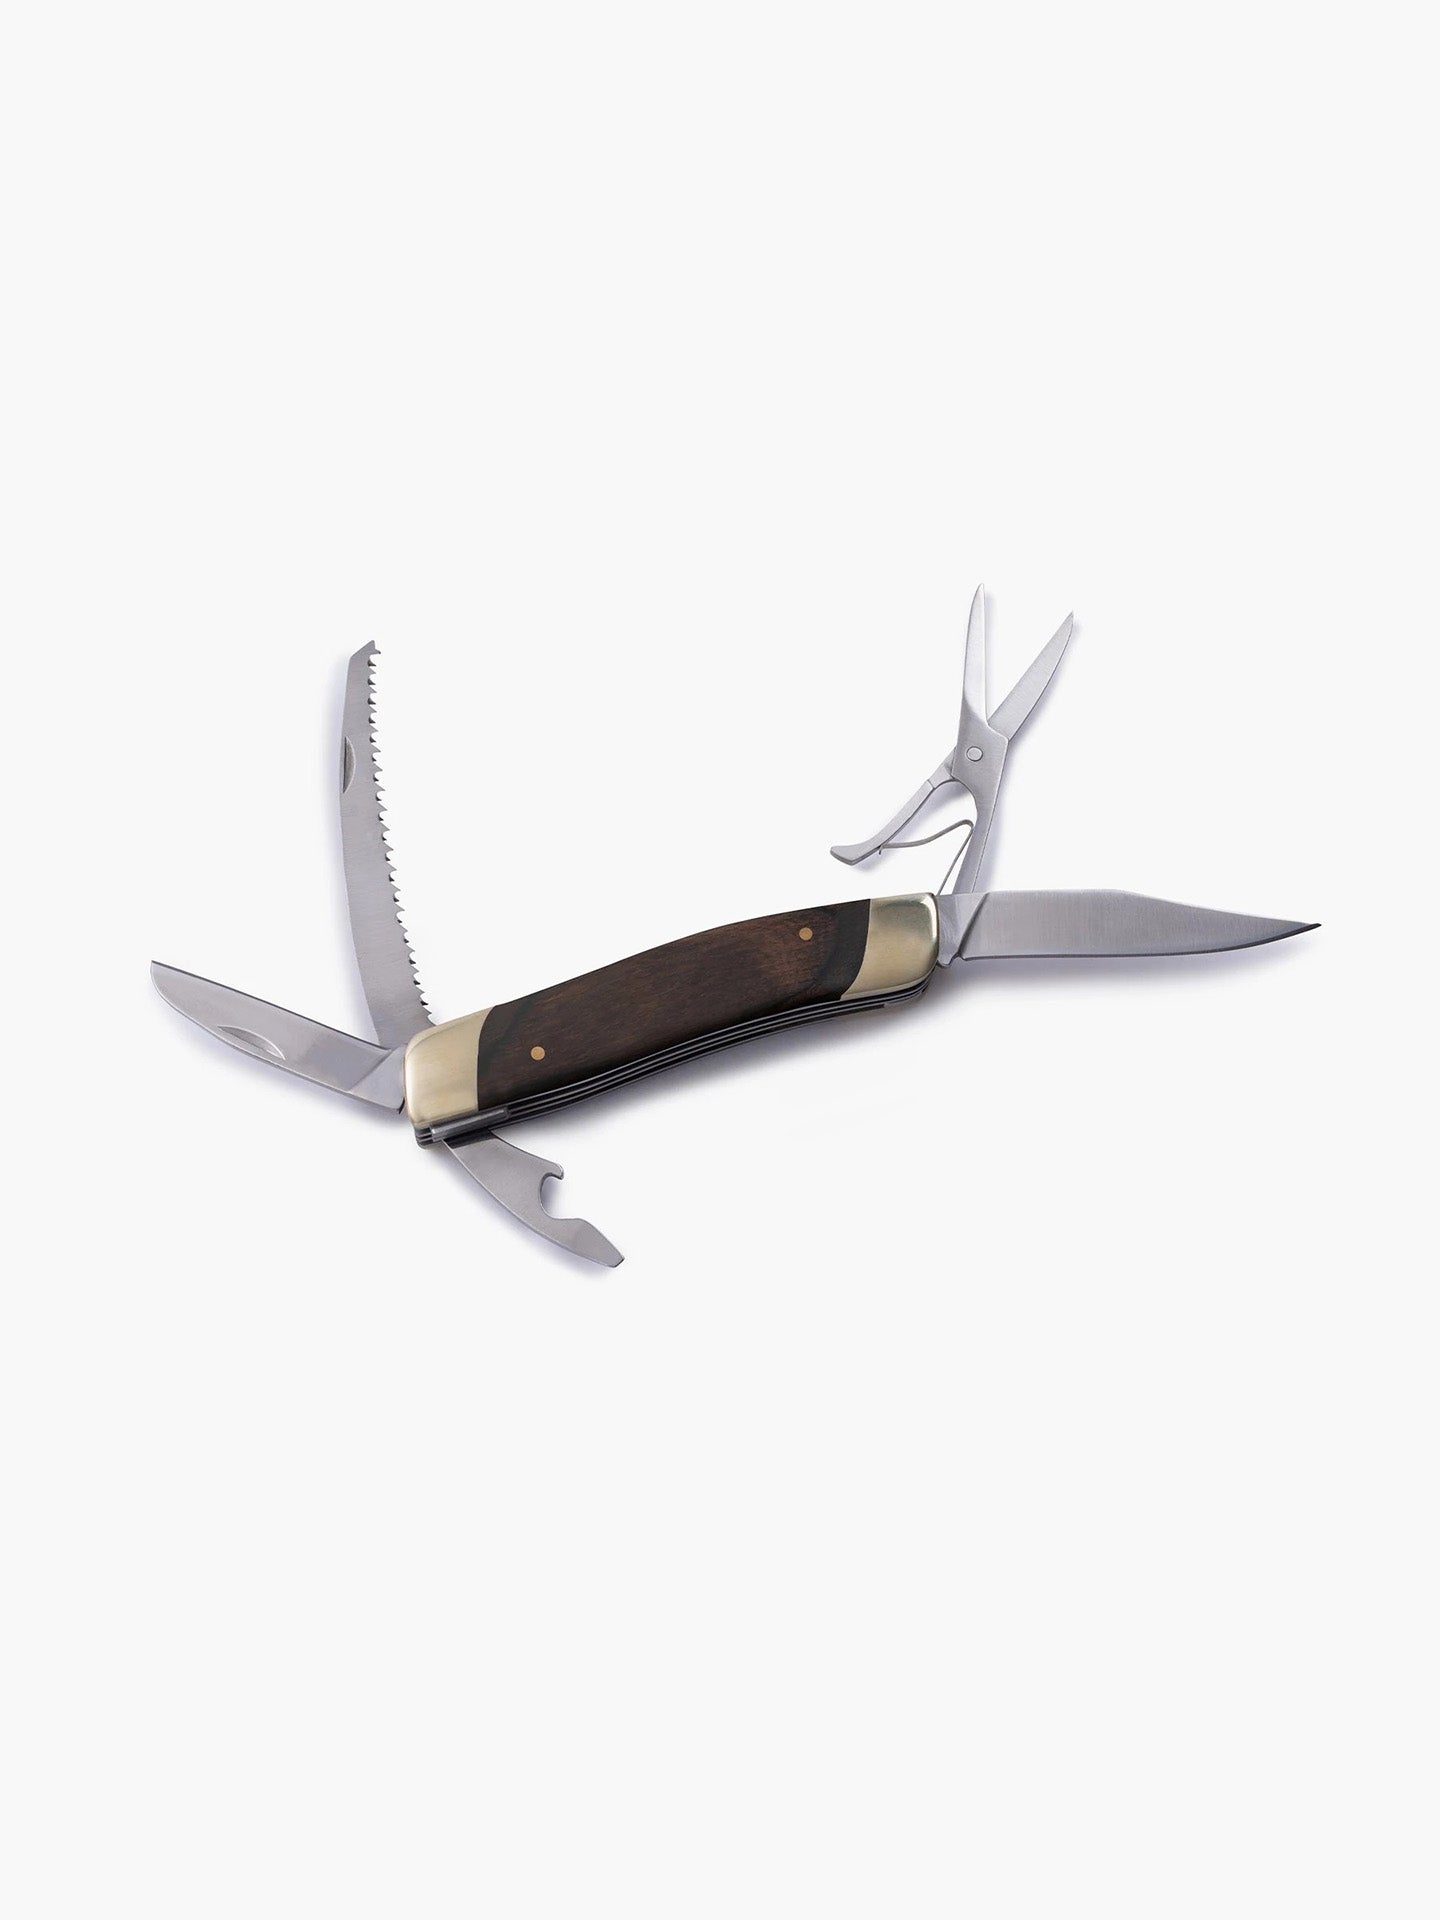 A Barebones Multi-Tool Pocket Knife with a wooden handle on a white background.